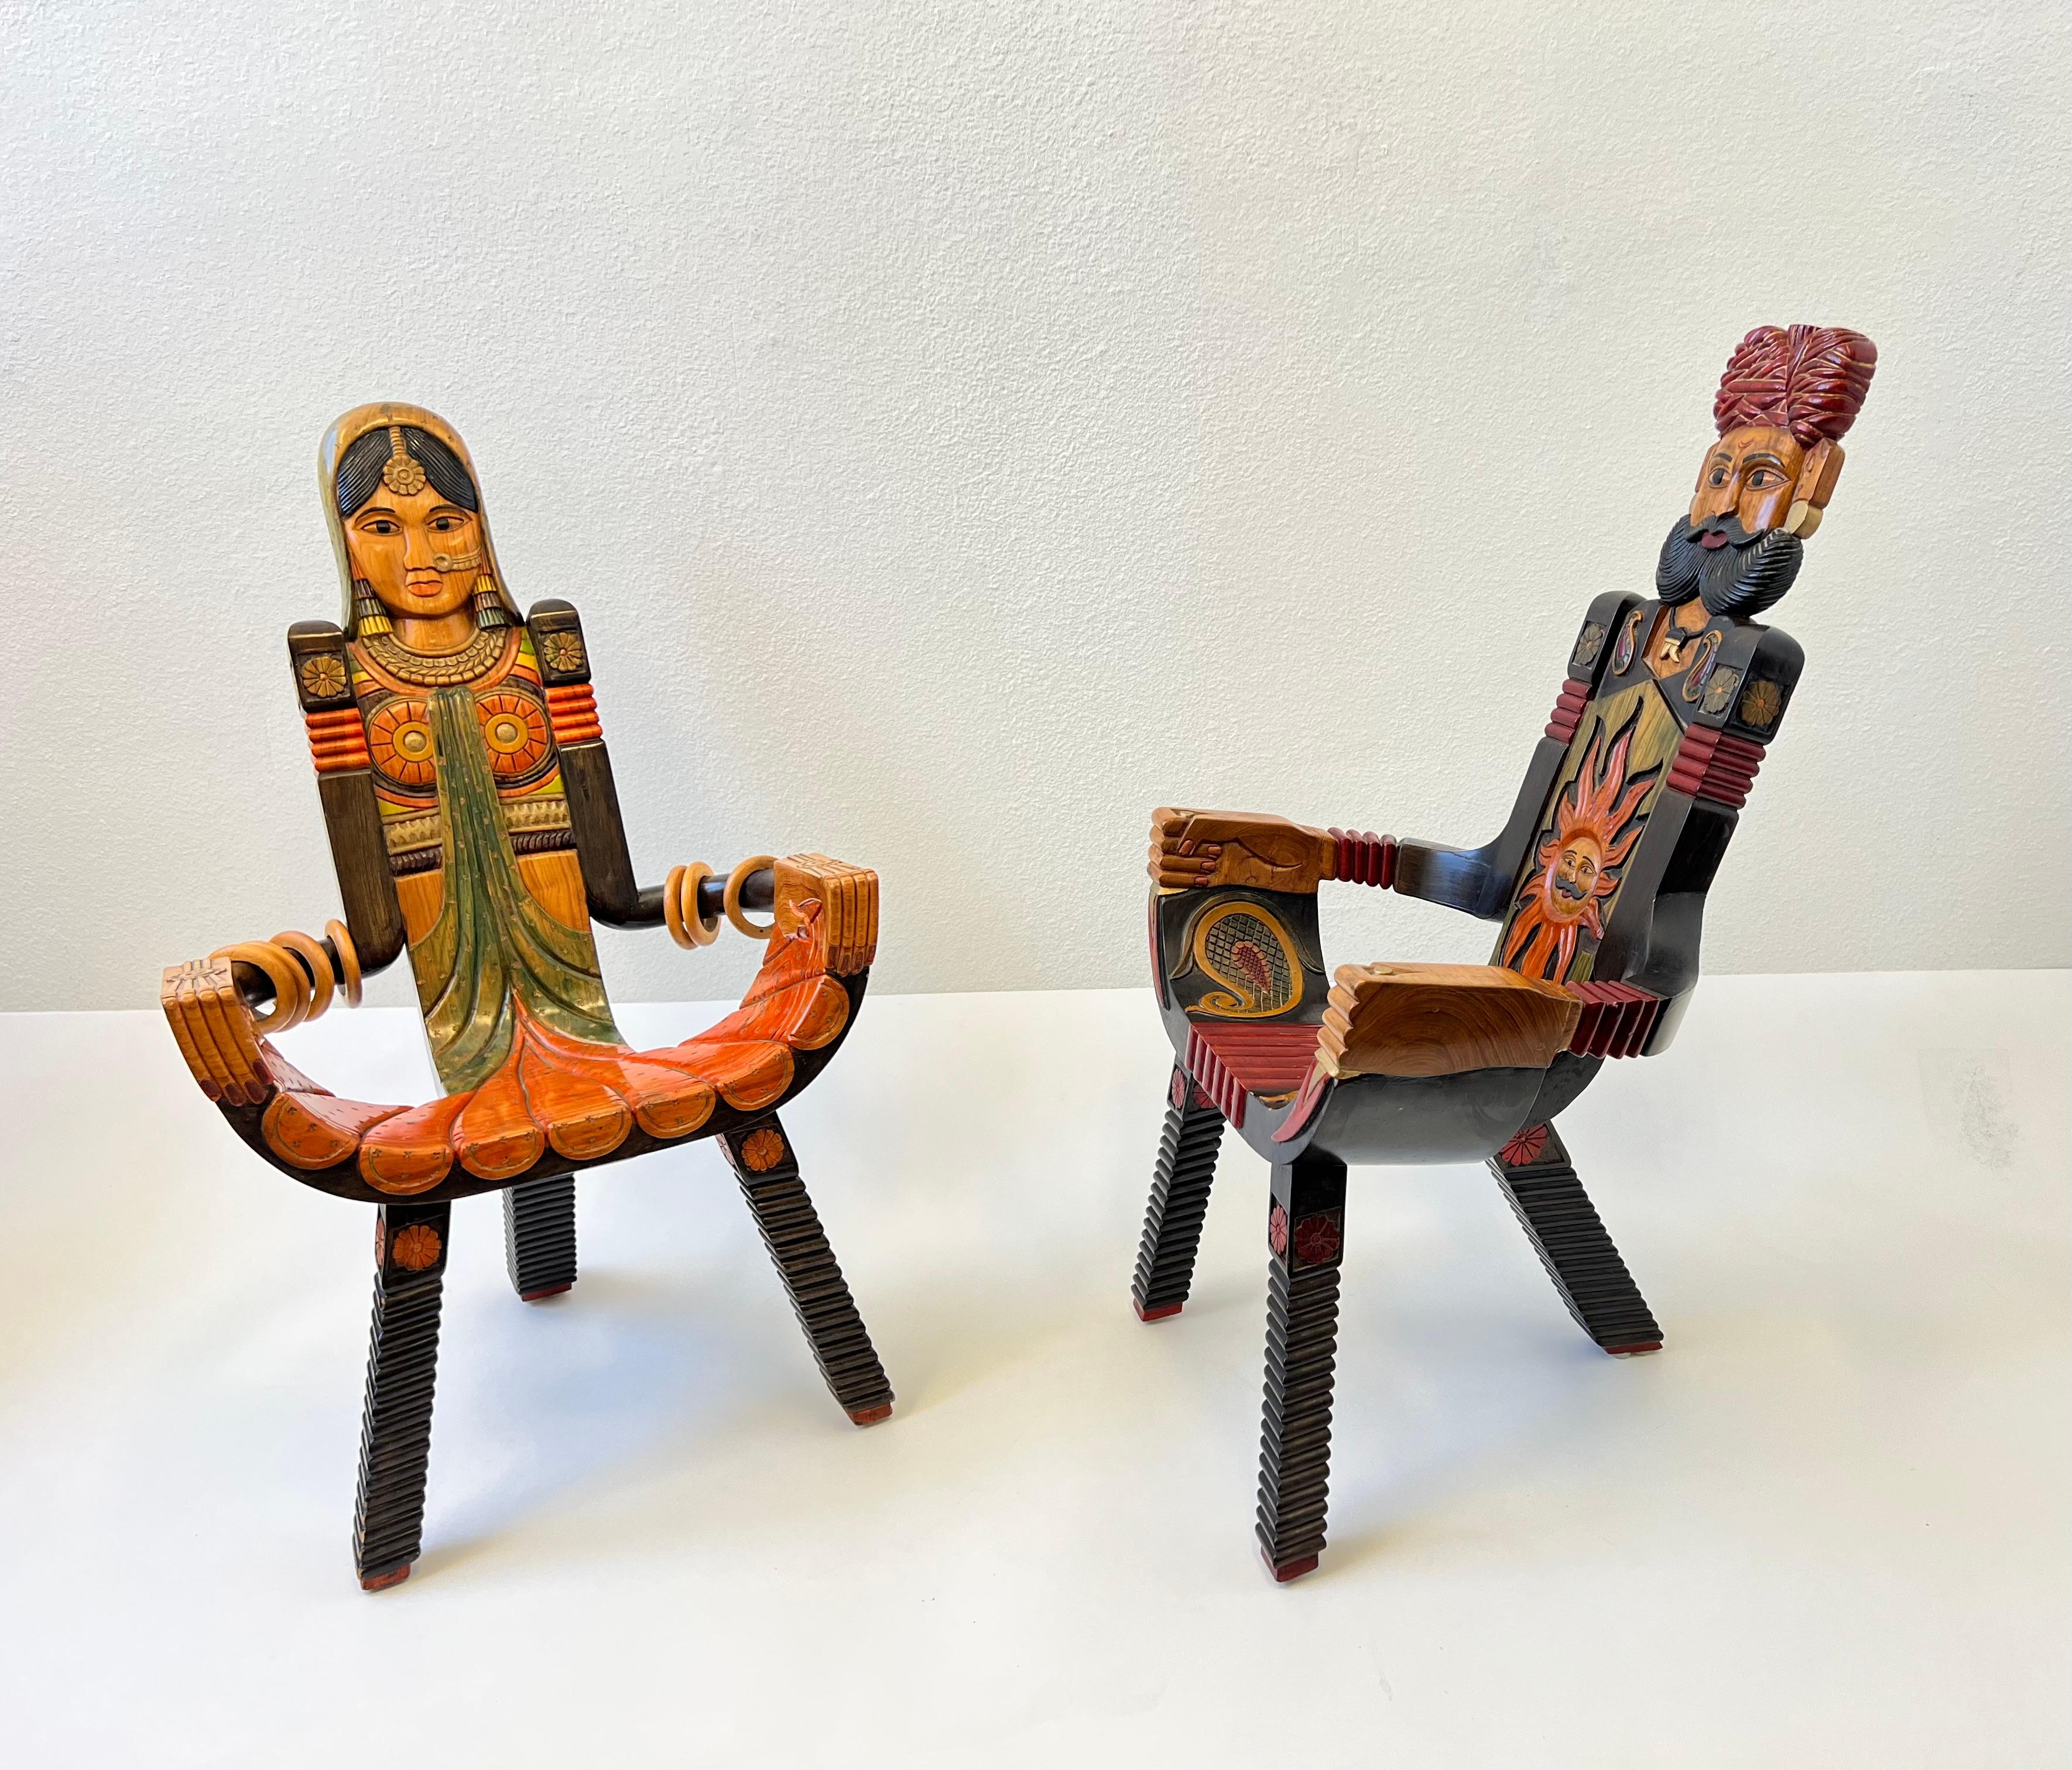 Pair of Indian hand carved and painted wood male and female chairs. 
This were purchased in India in the 1970’s.
In beautiful original condition.
Measurements: 21.5” Deep, 21” Wide, 34.75” High, 13.75” Seat.